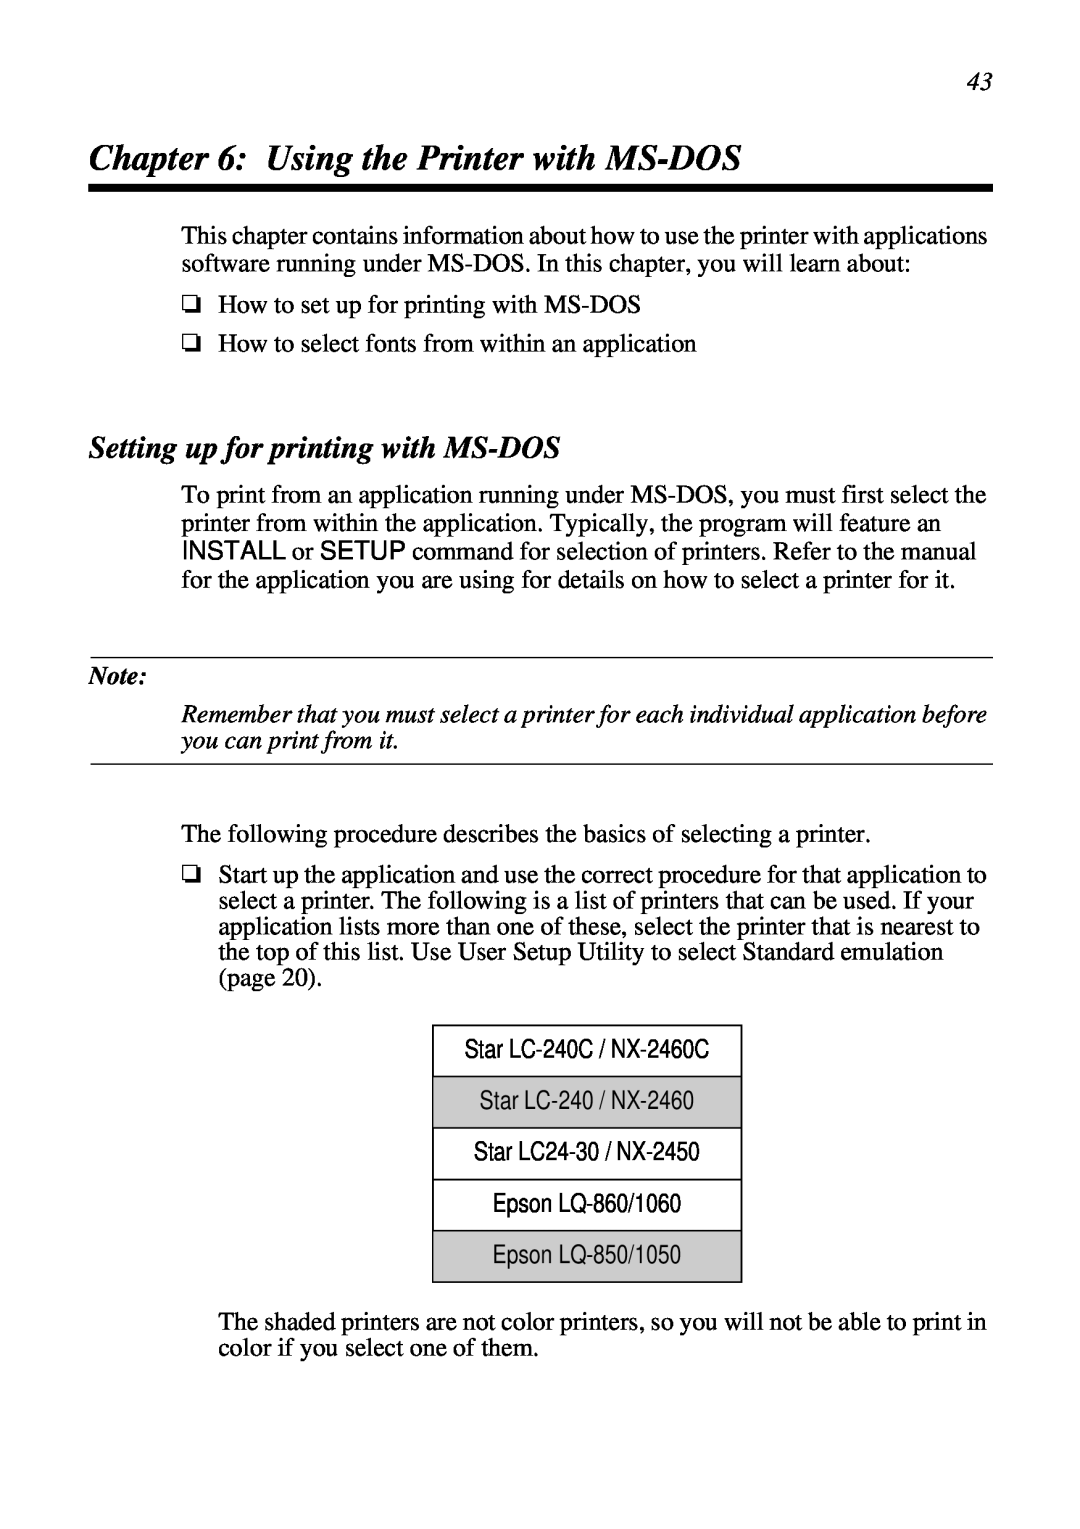 Star Micronics NX-2460C user manual Using the Printer with MS-DOS, Setting up for printing with MS-DOS 